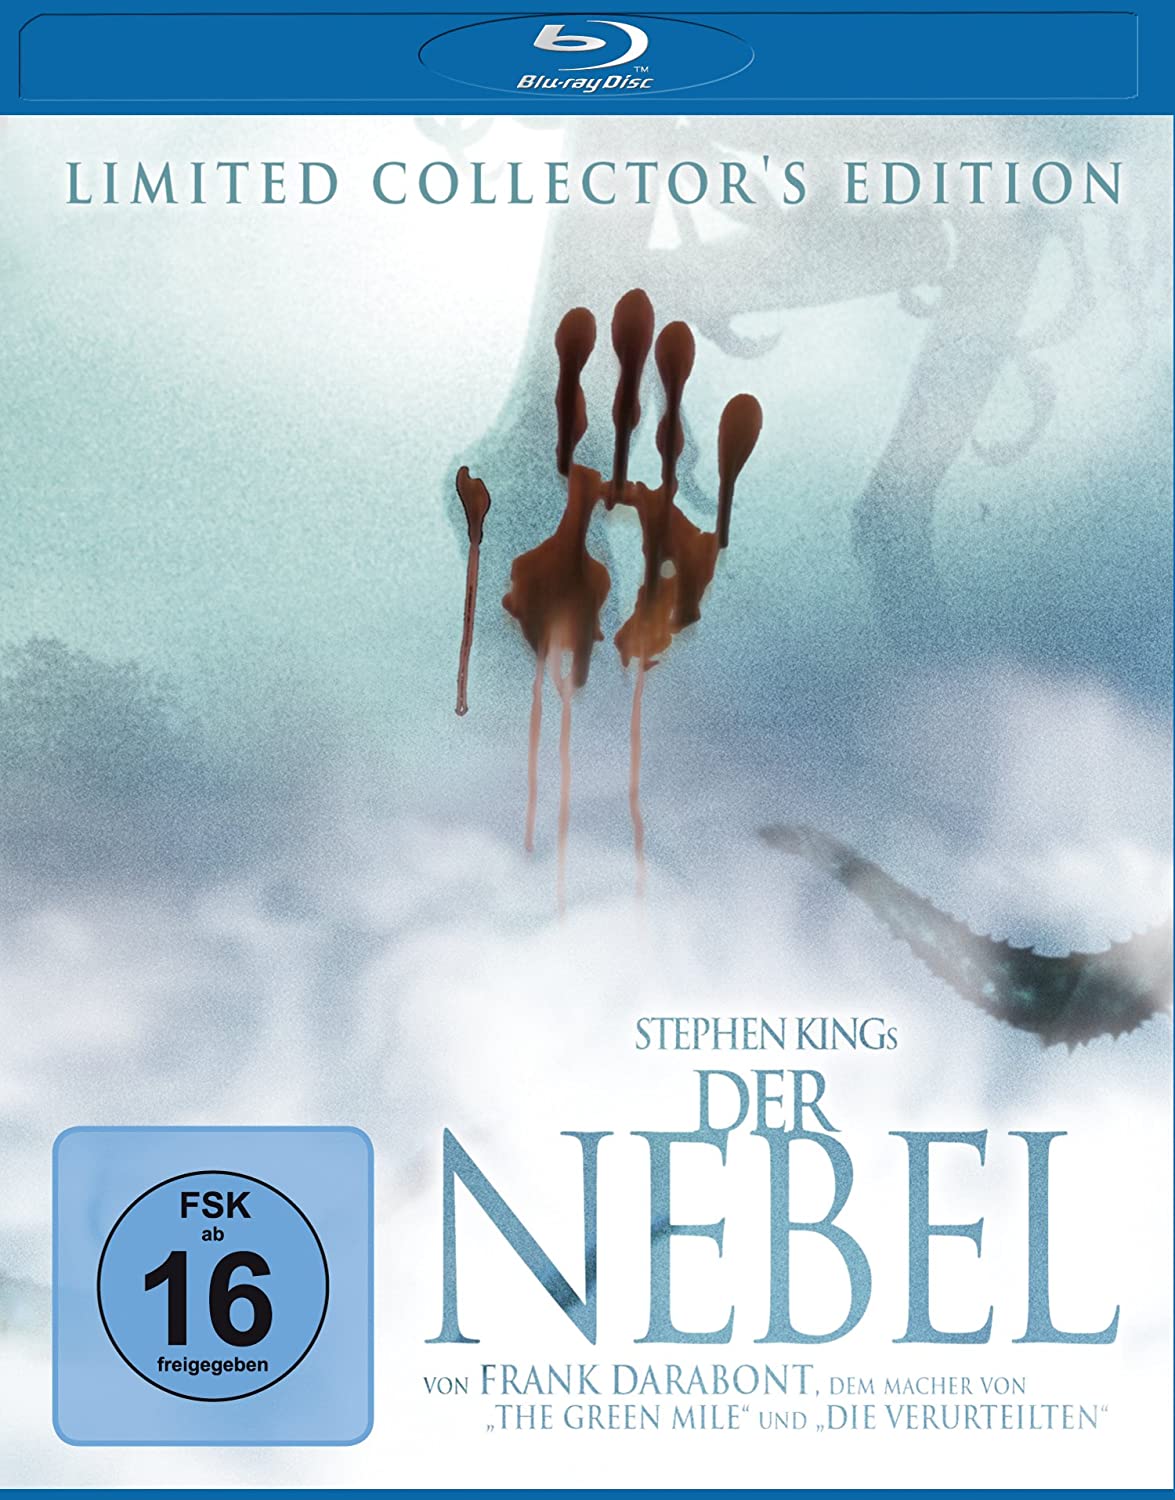 Stephen Kings - Der Nebel - Limited Collector's Edition